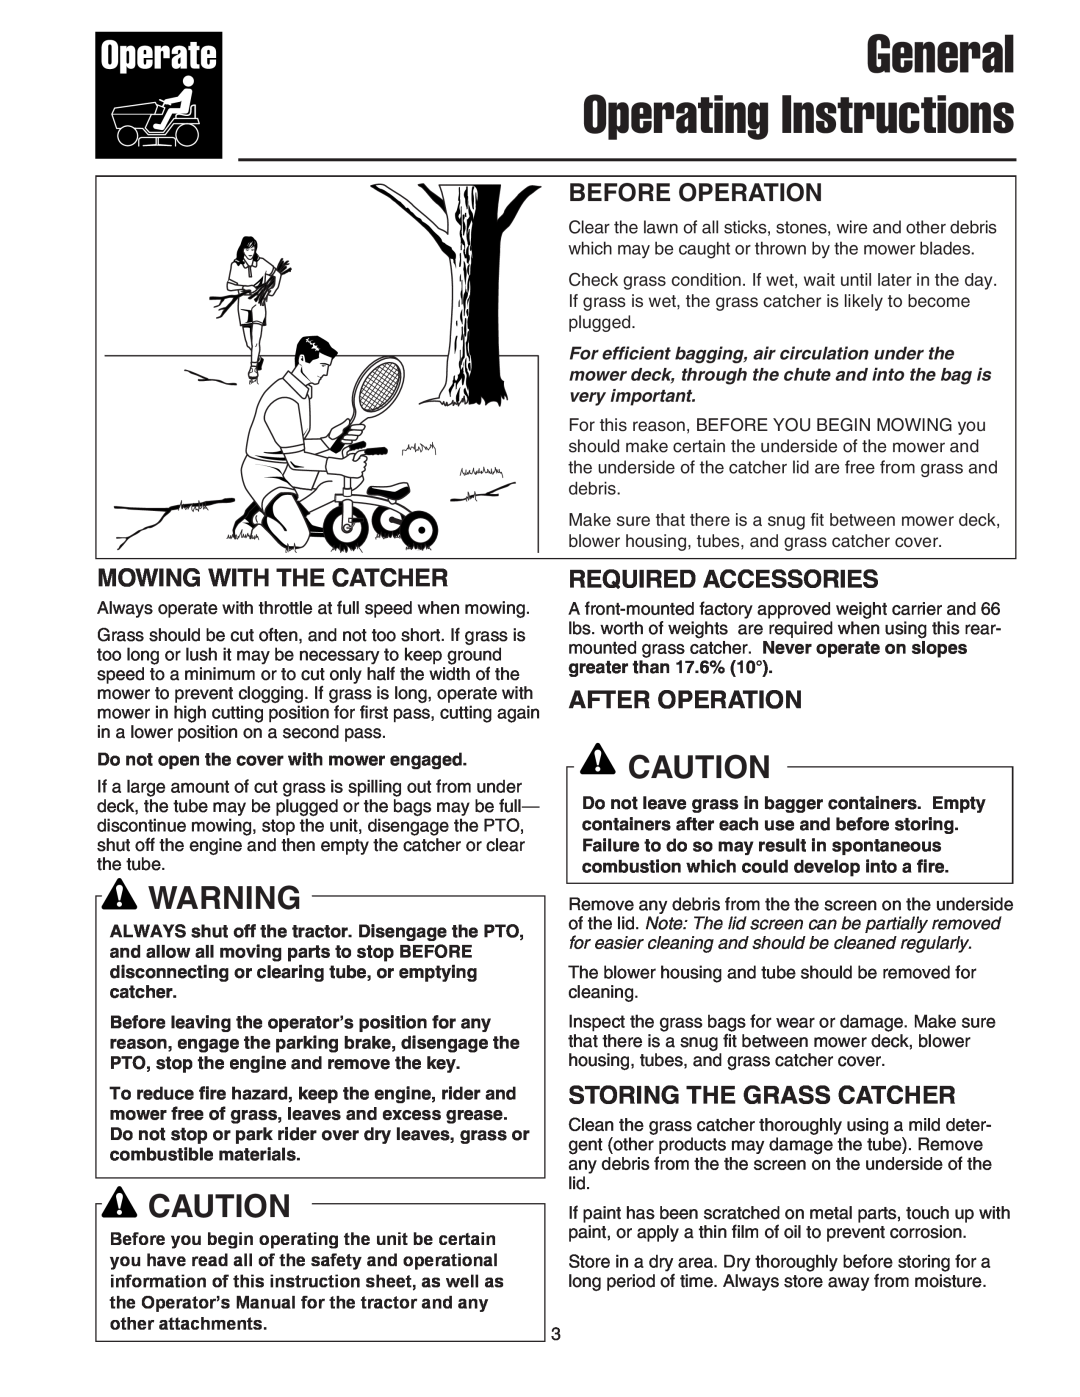 Snapper Clean Sweep Twin Catcher manual General Operating Instructions, Before Operation, Mowing With The Catcher 